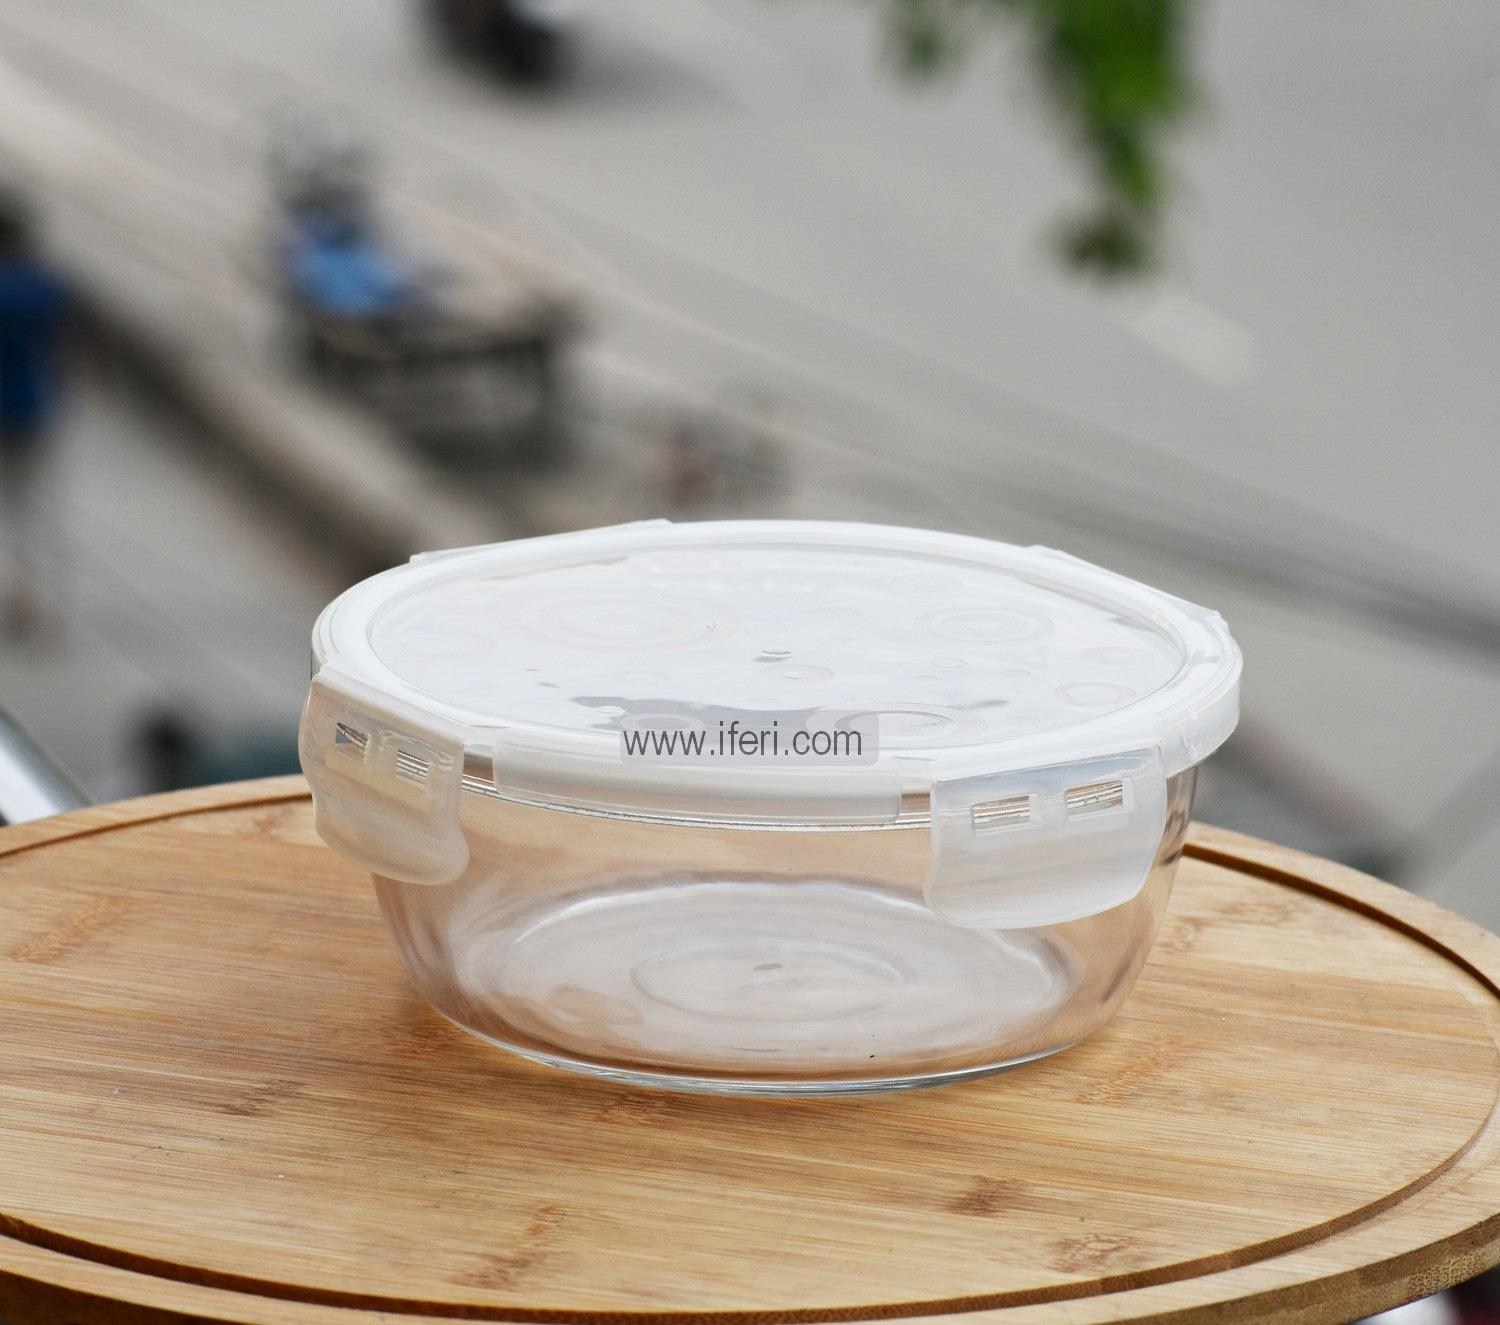 6.5 inch Oven Proof Glass Food Container RY0121 Price in Bangladesh - iferi.com